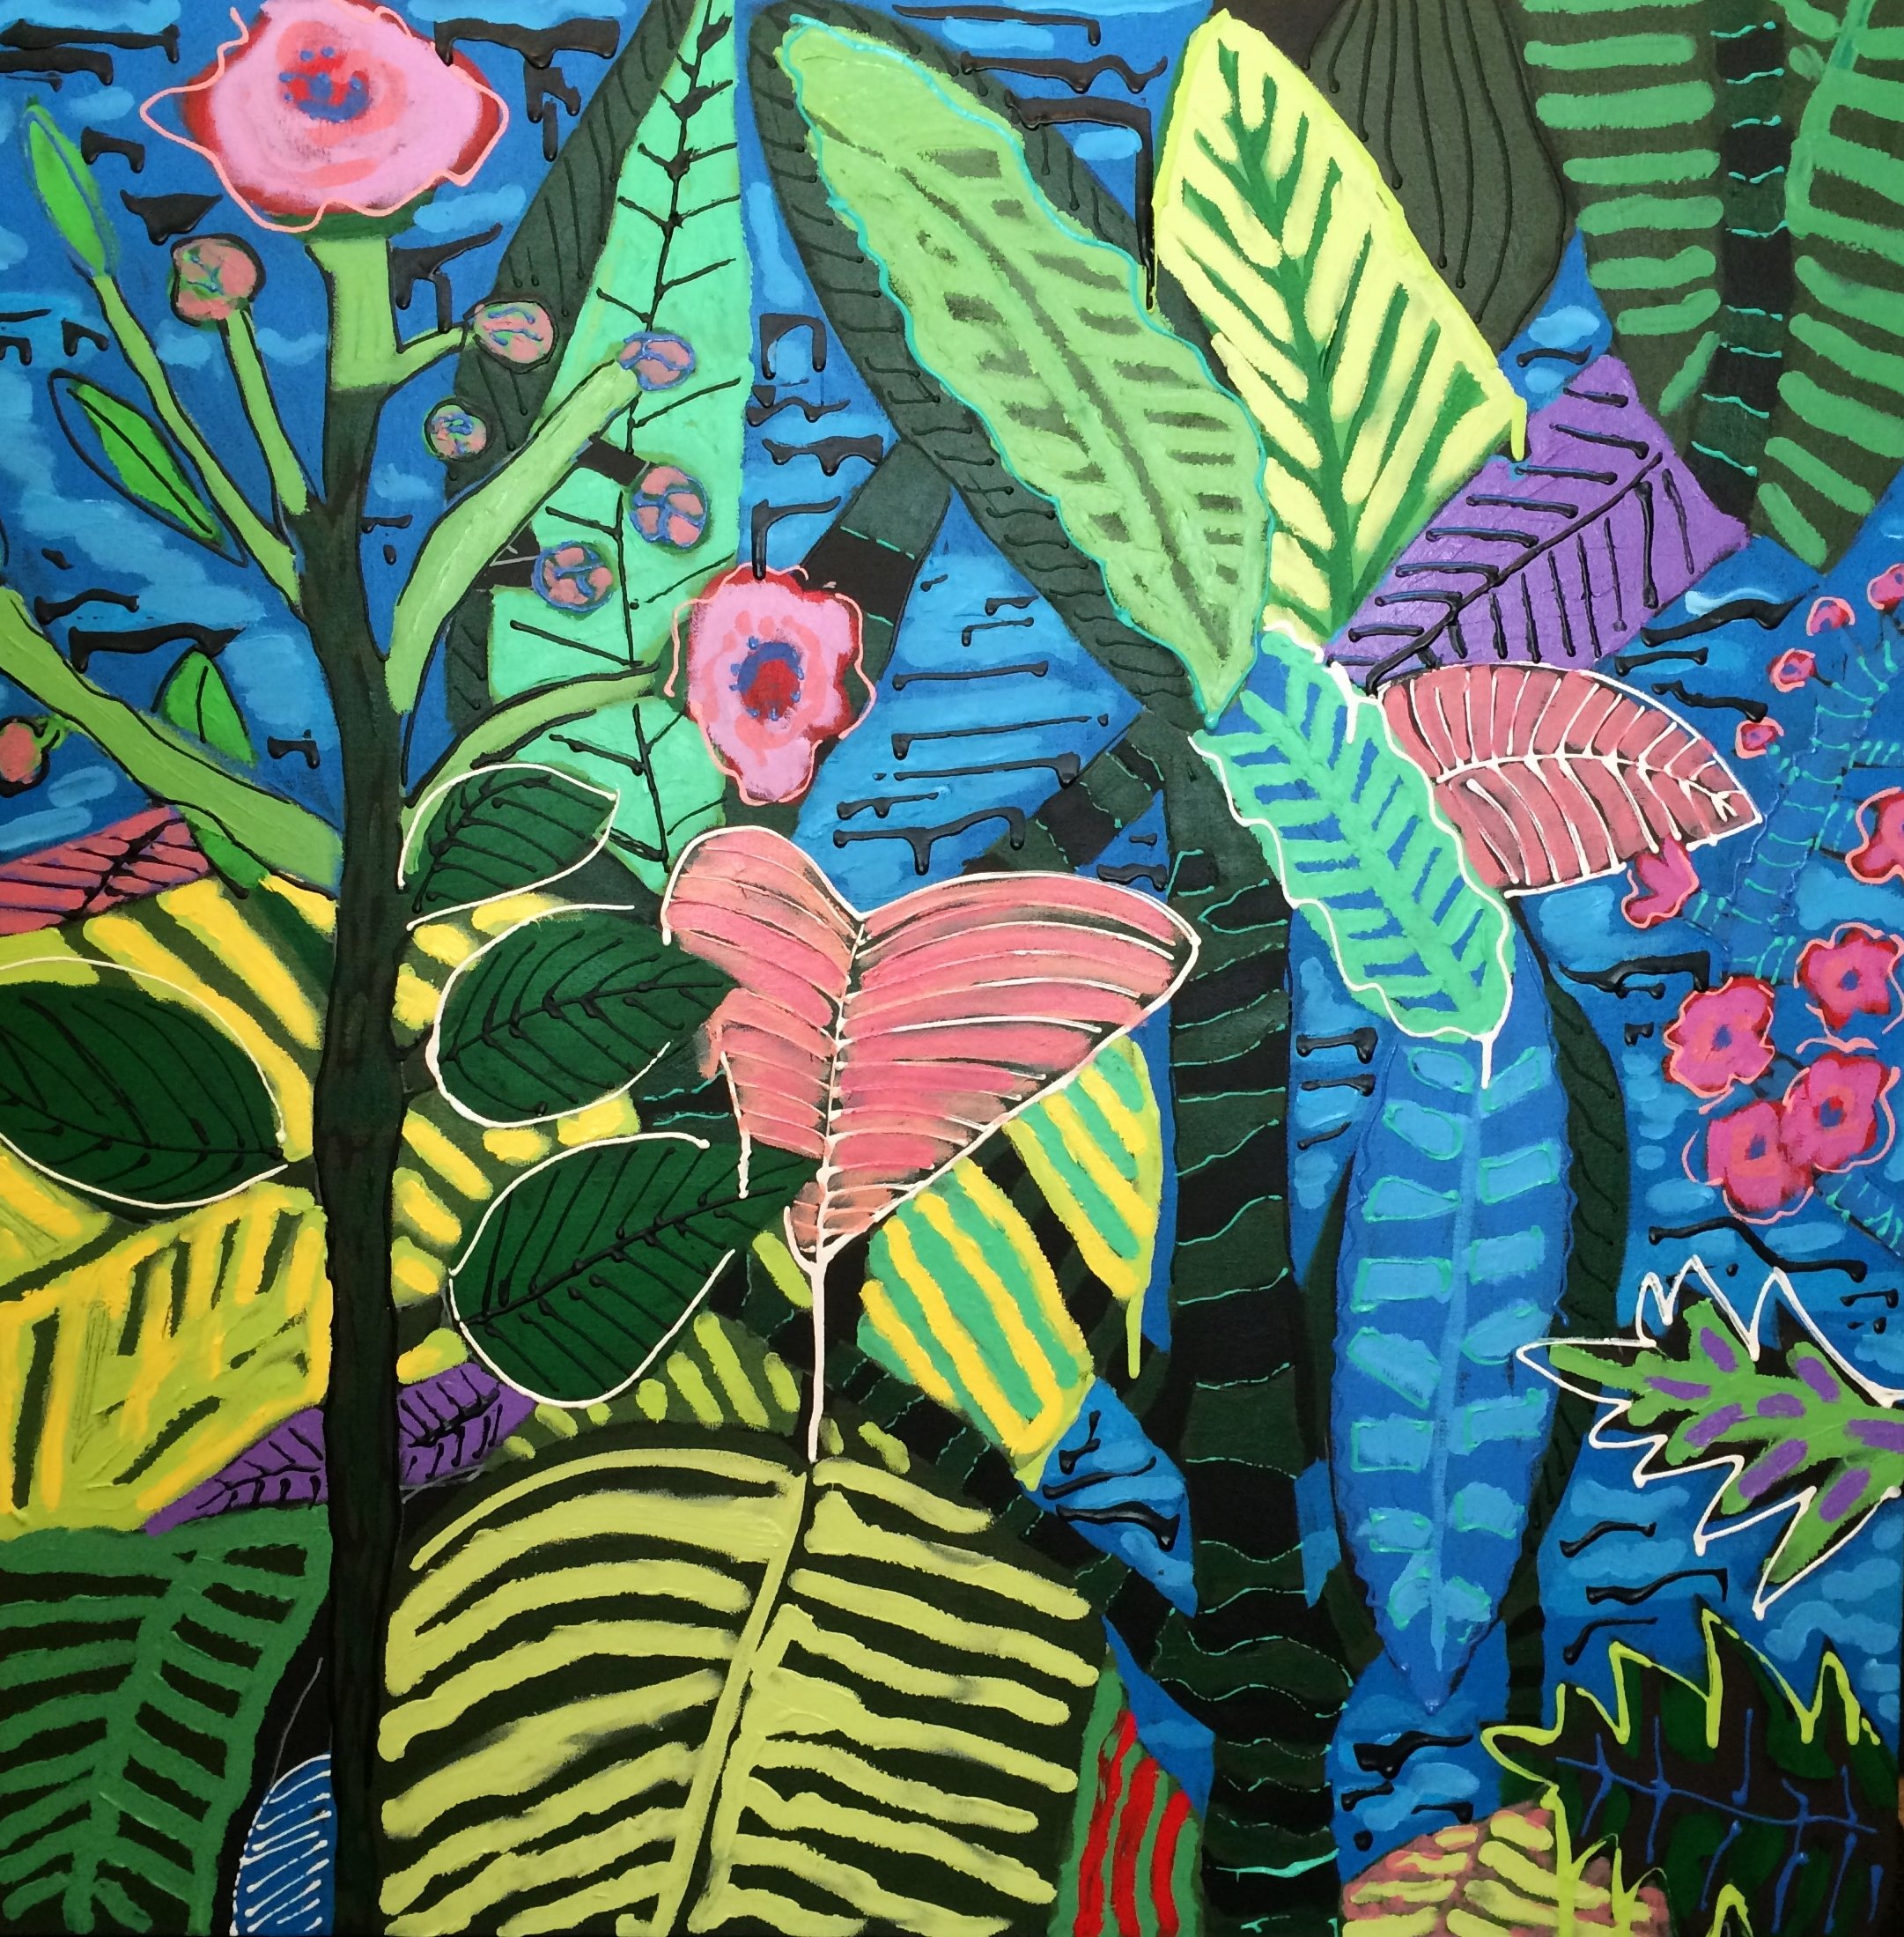 Patterns in a Garden, Acrylic Landscape Painting by Simmermacher